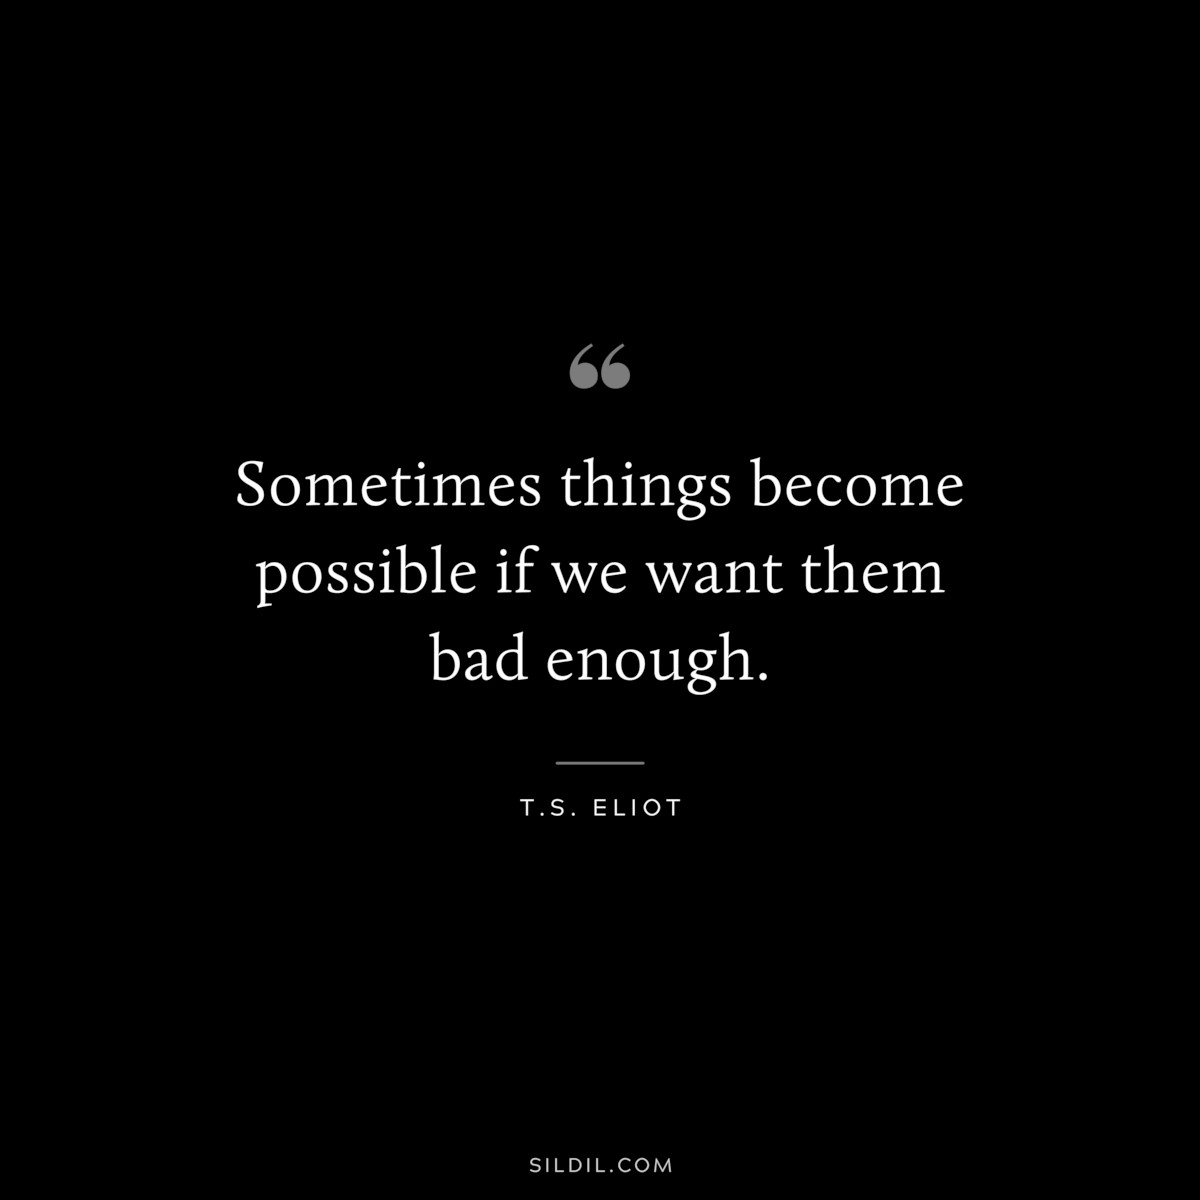 Sometimes things become possible if we want them bad enough. ― T.S. Eliot